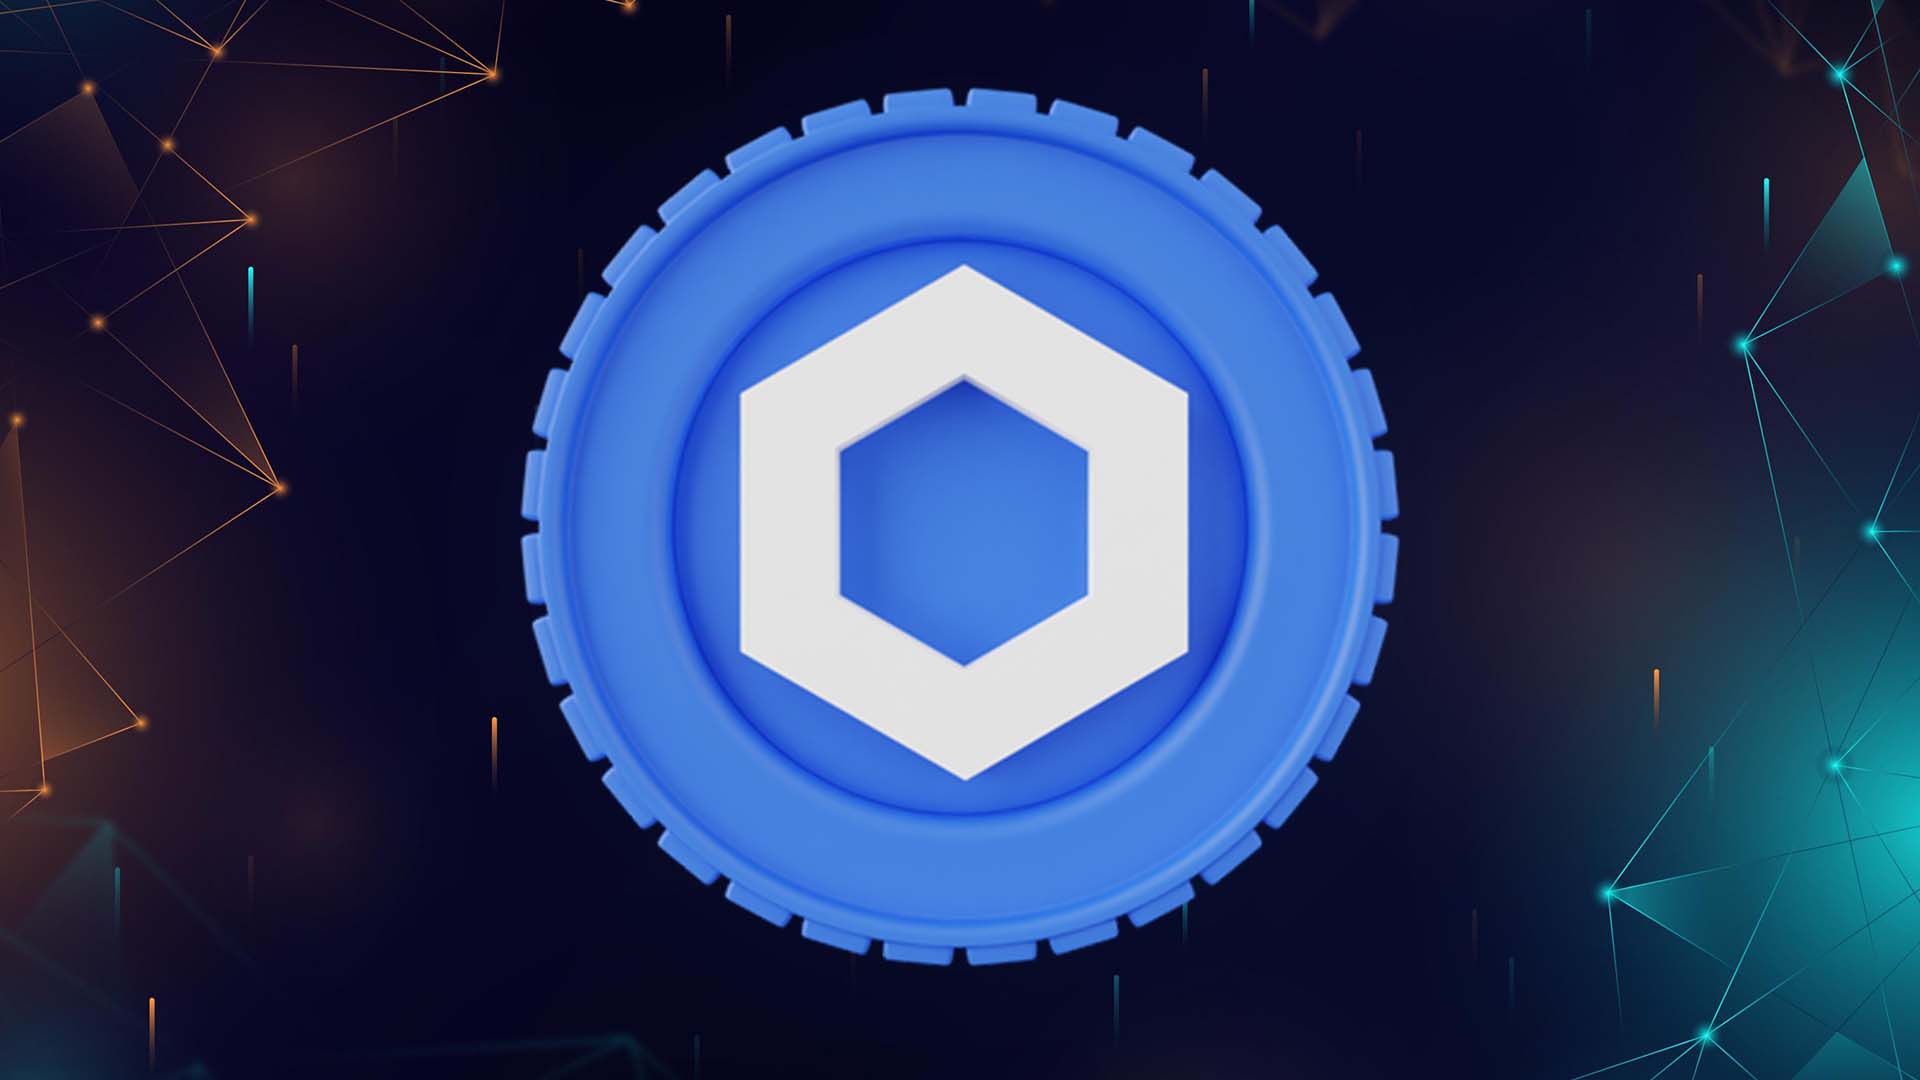 ChainLink Price Analysis: Should Investors Wait or the LINK will break the Symmetrical Imaging 